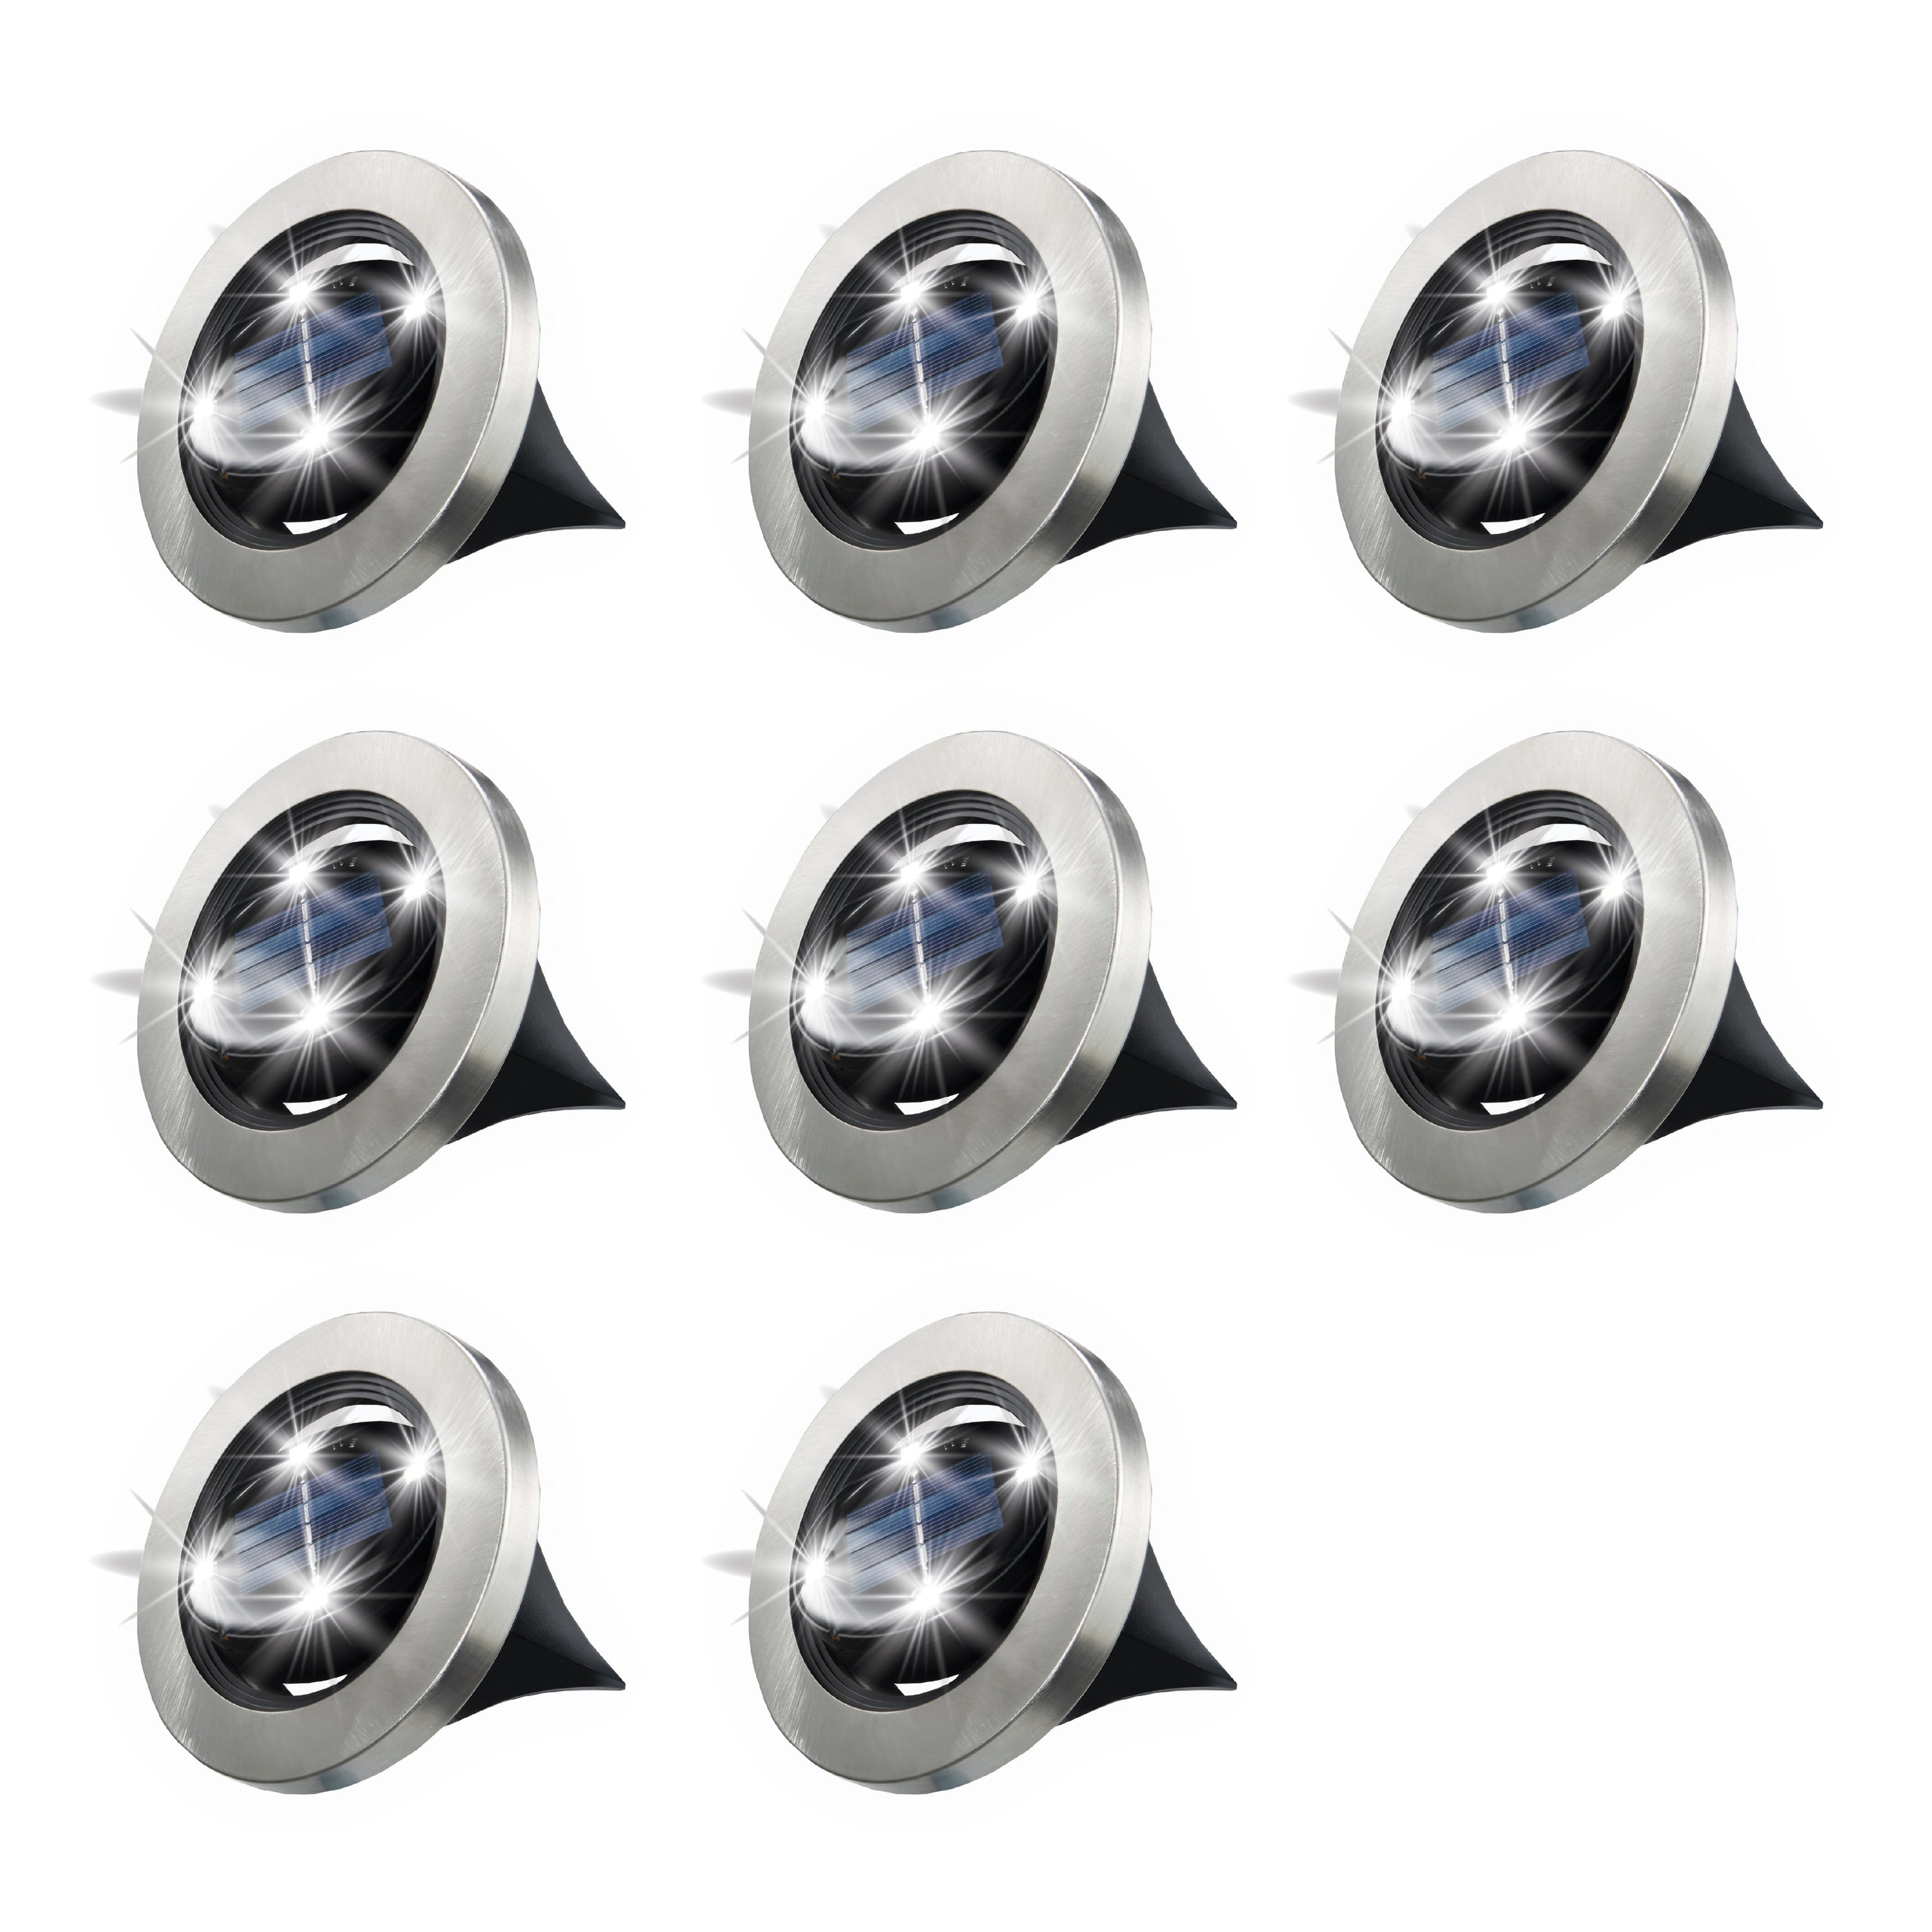 Bell + Howell Pathway & Landscape Disk Lights Stainless Steel - 8 Pack